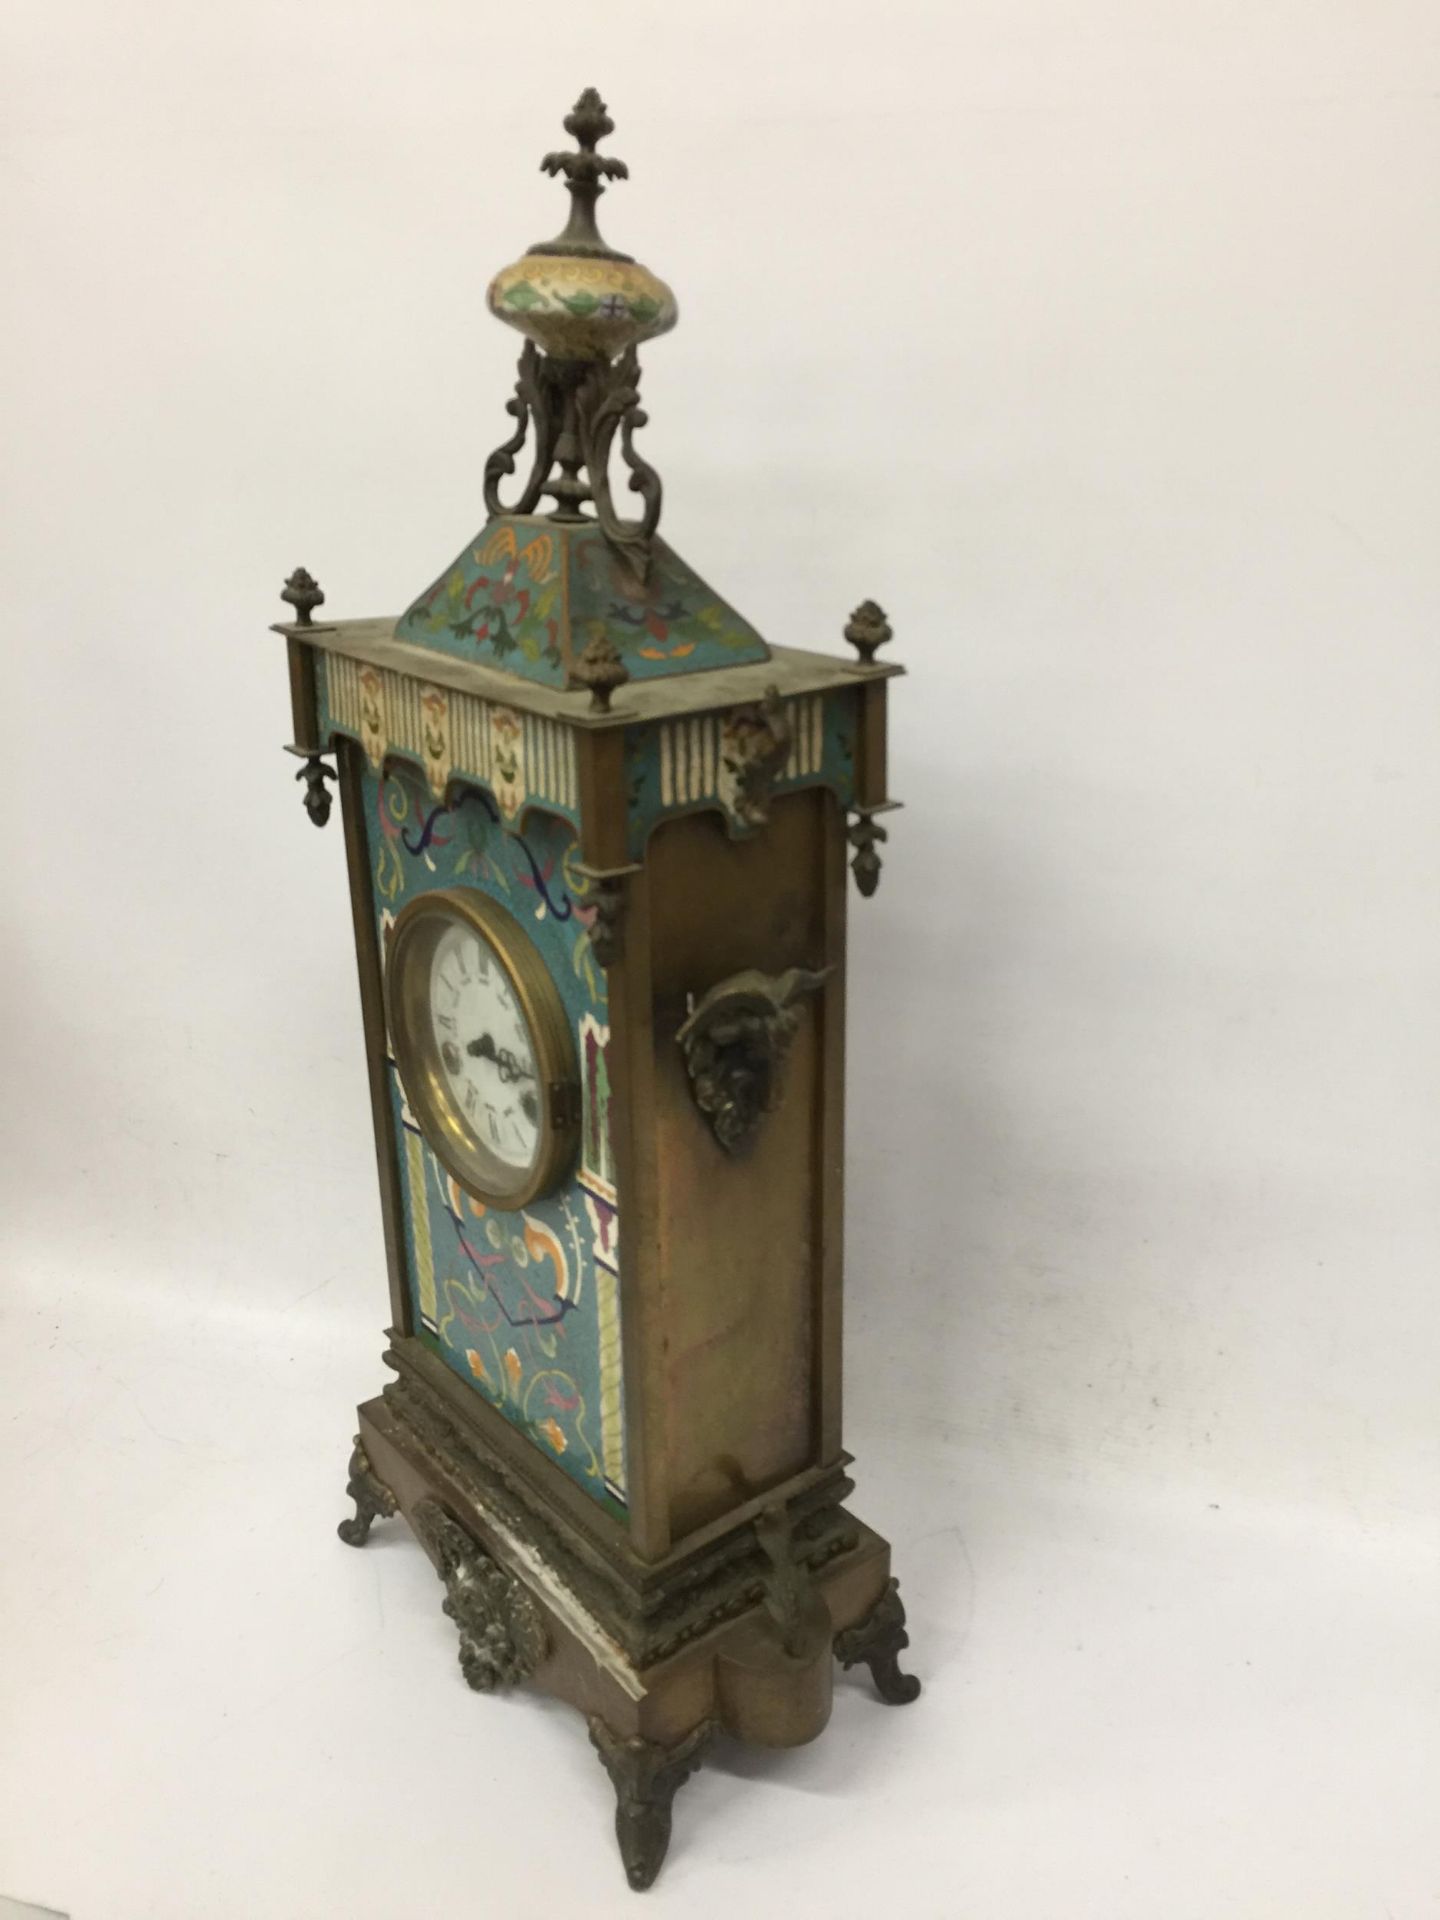 AN ART NOUVEAU CLOISONNE AND BRASS CHIMING MANTLE CLOCK WITH RAM HEAD SIDE DESIGN - Image 5 of 8